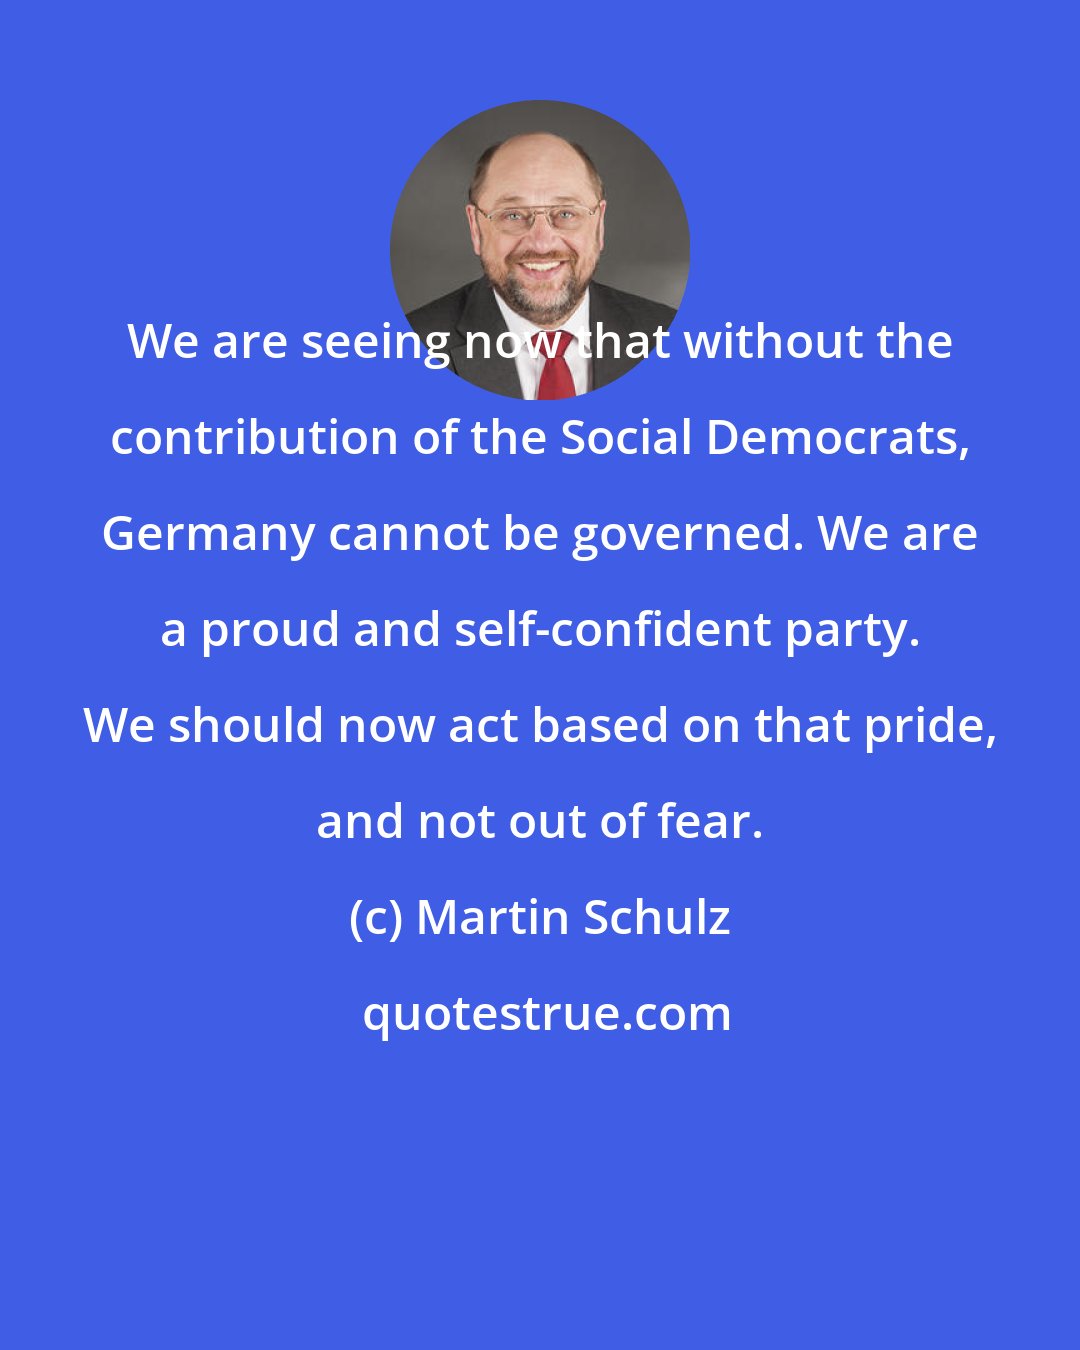 Martin Schulz: We are seeing now that without the contribution of the Social Democrats, Germany cannot be governed. We are a proud and self-confident party. We should now act based on that pride, and not out of fear.